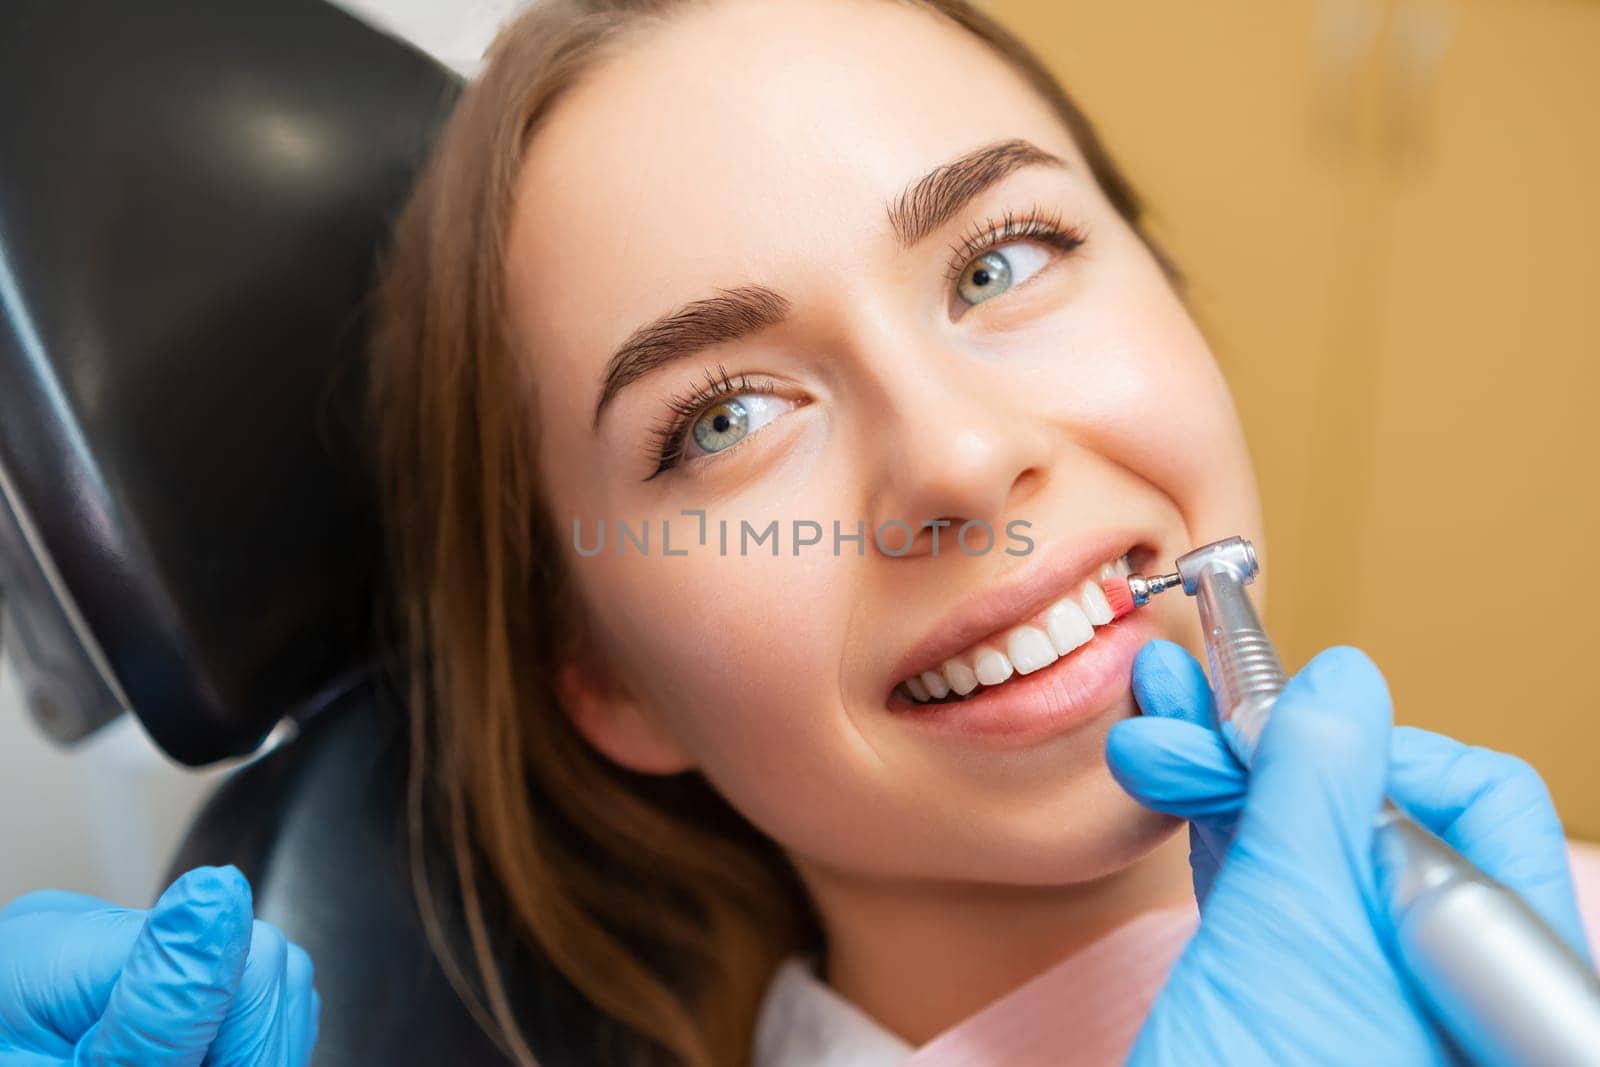 Woman patient sitting in medical chair during teeth grinding procedure.